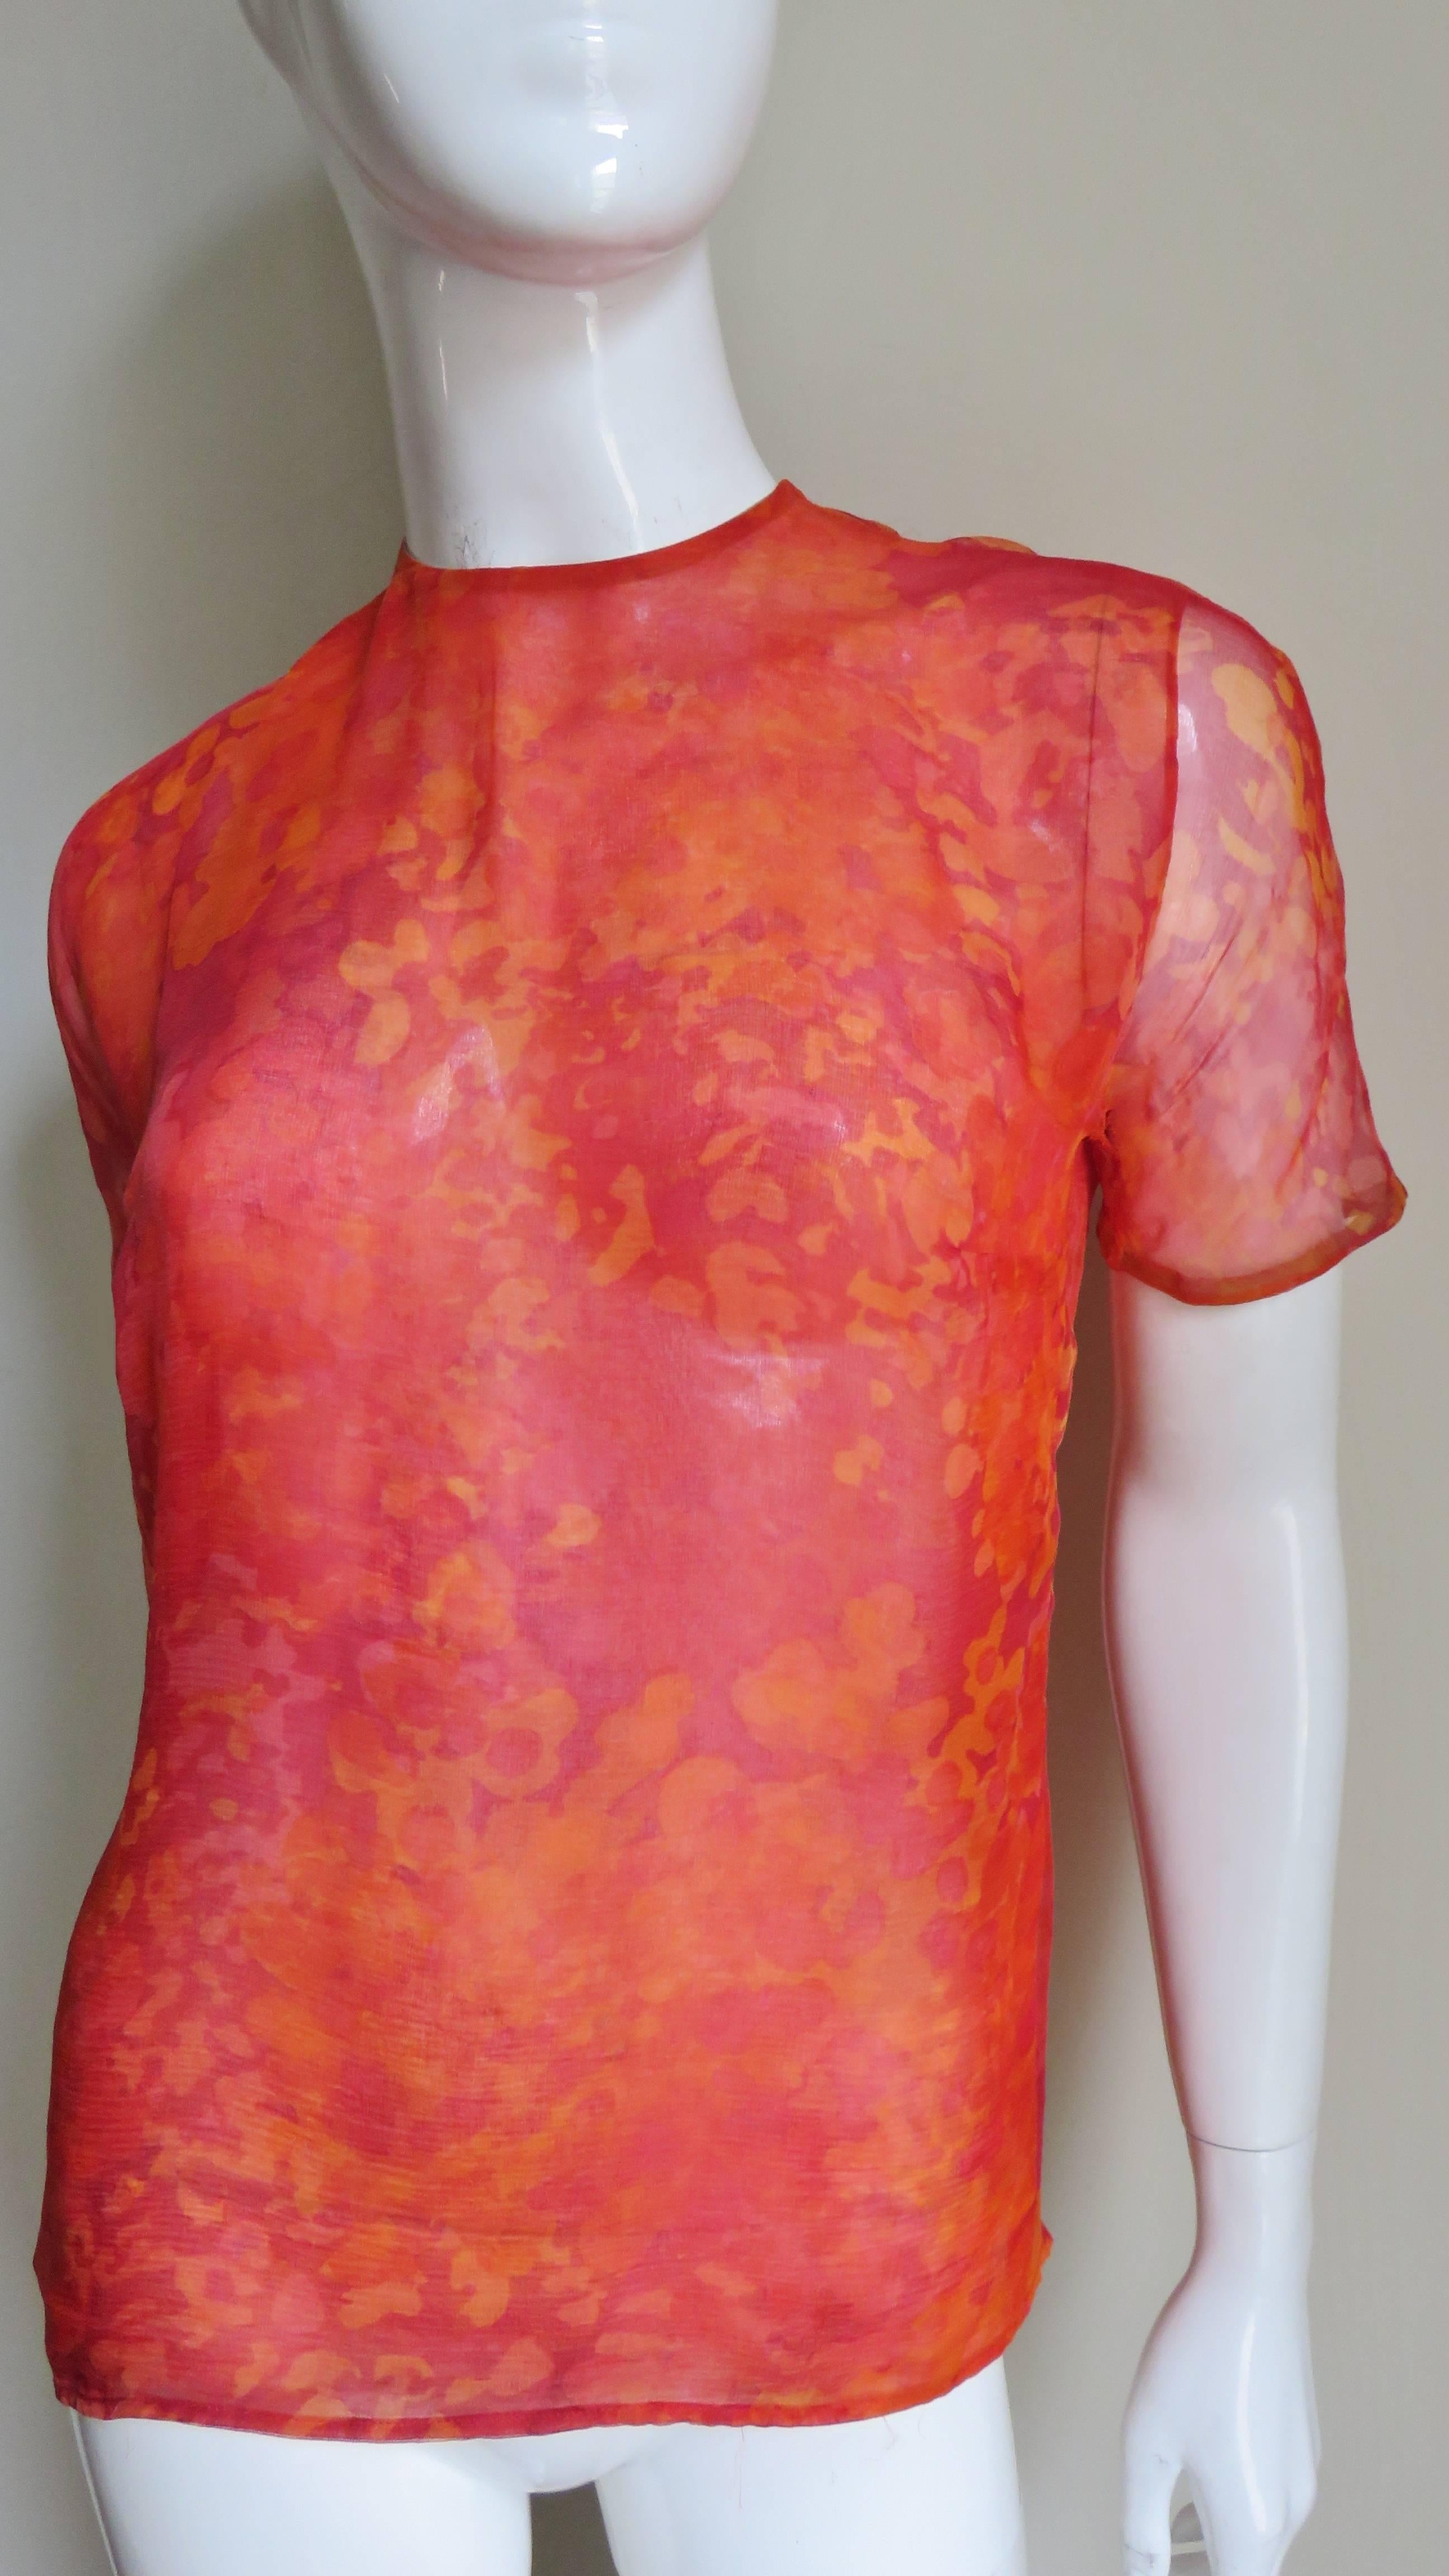 A very pretty silk blouse by Pauline Trigere.  It is made of 2 sheer layers of abstract pattern silk in shades of red and orange.  There are couture details by way of bound buttonholes and self covered buttons up the back.  There is delicate hand